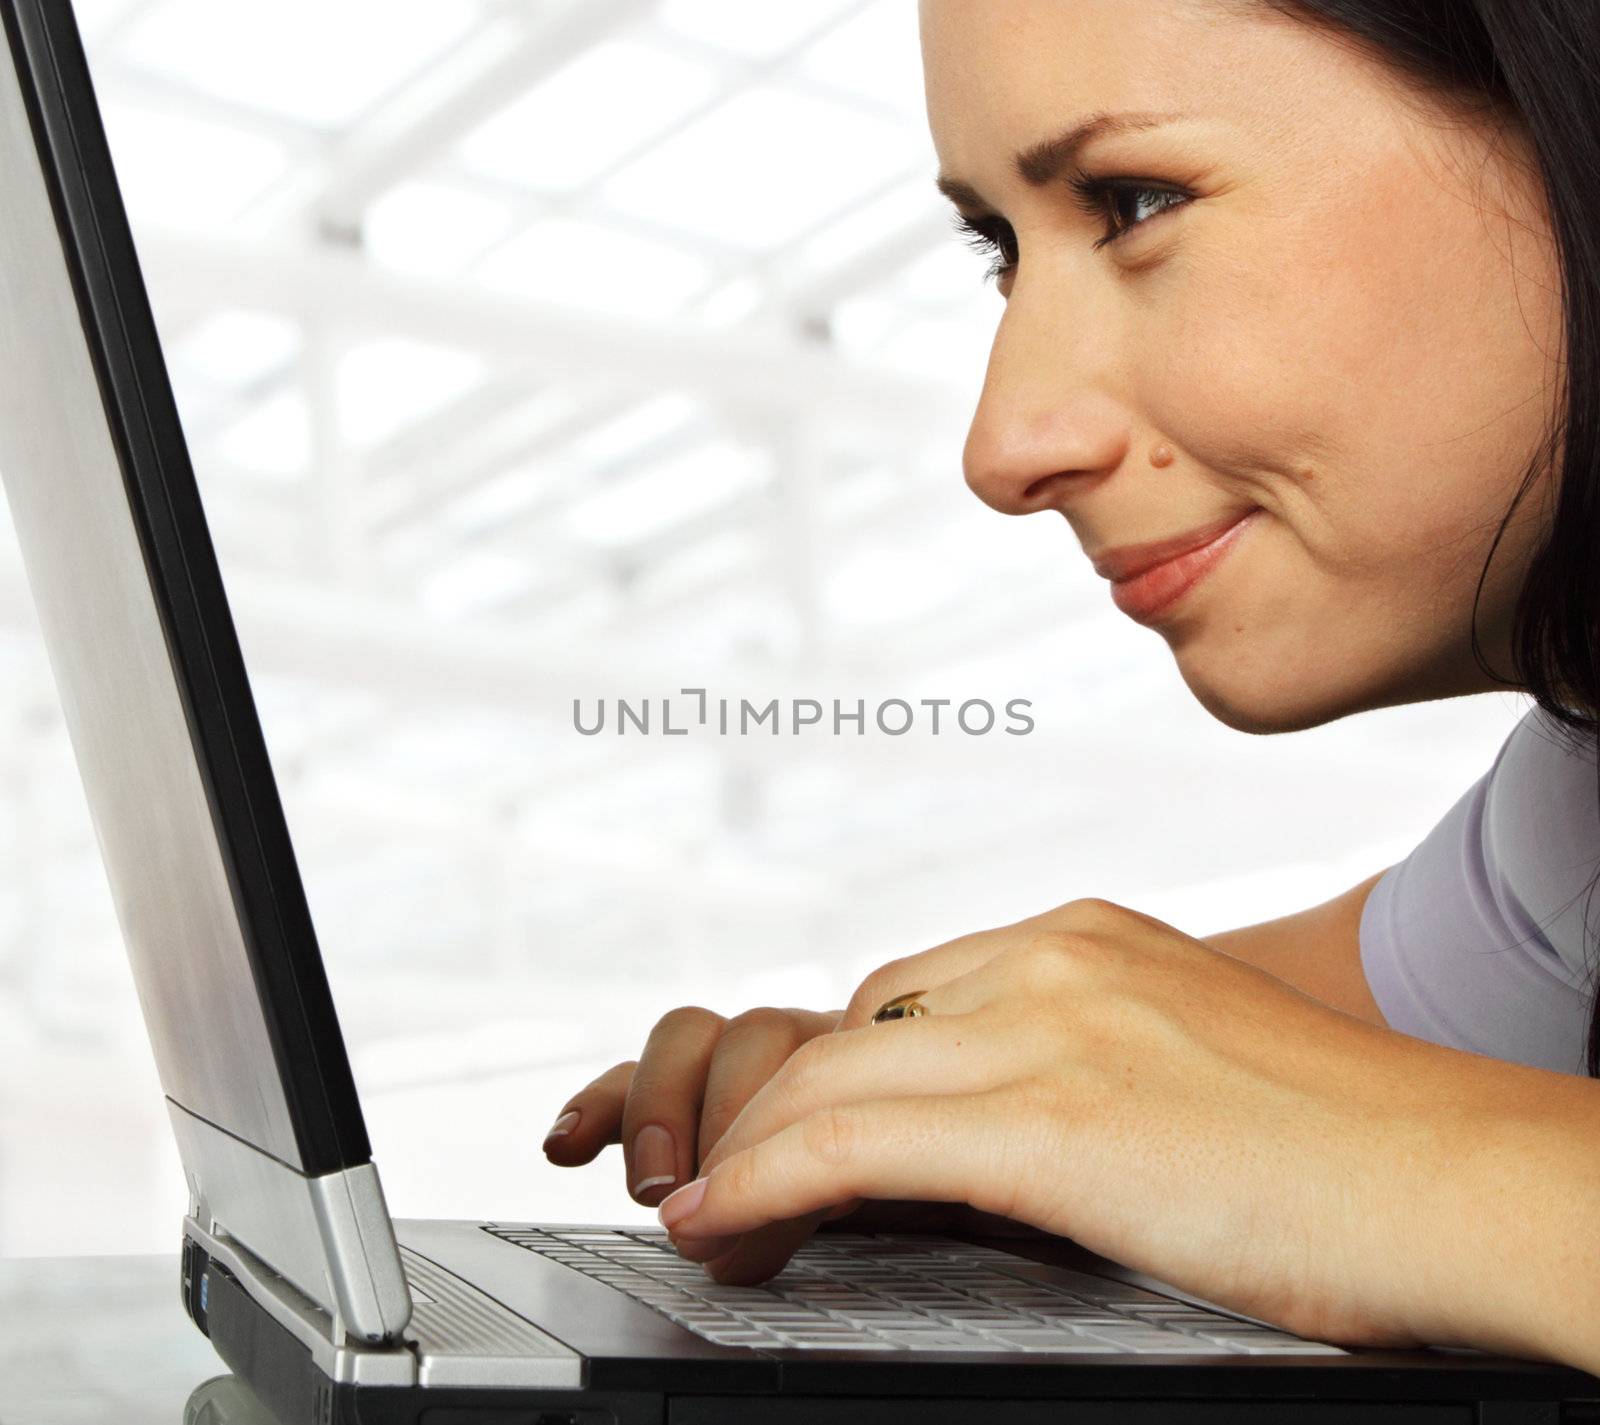 close-up of a female working profoundly on a laptop, smiling